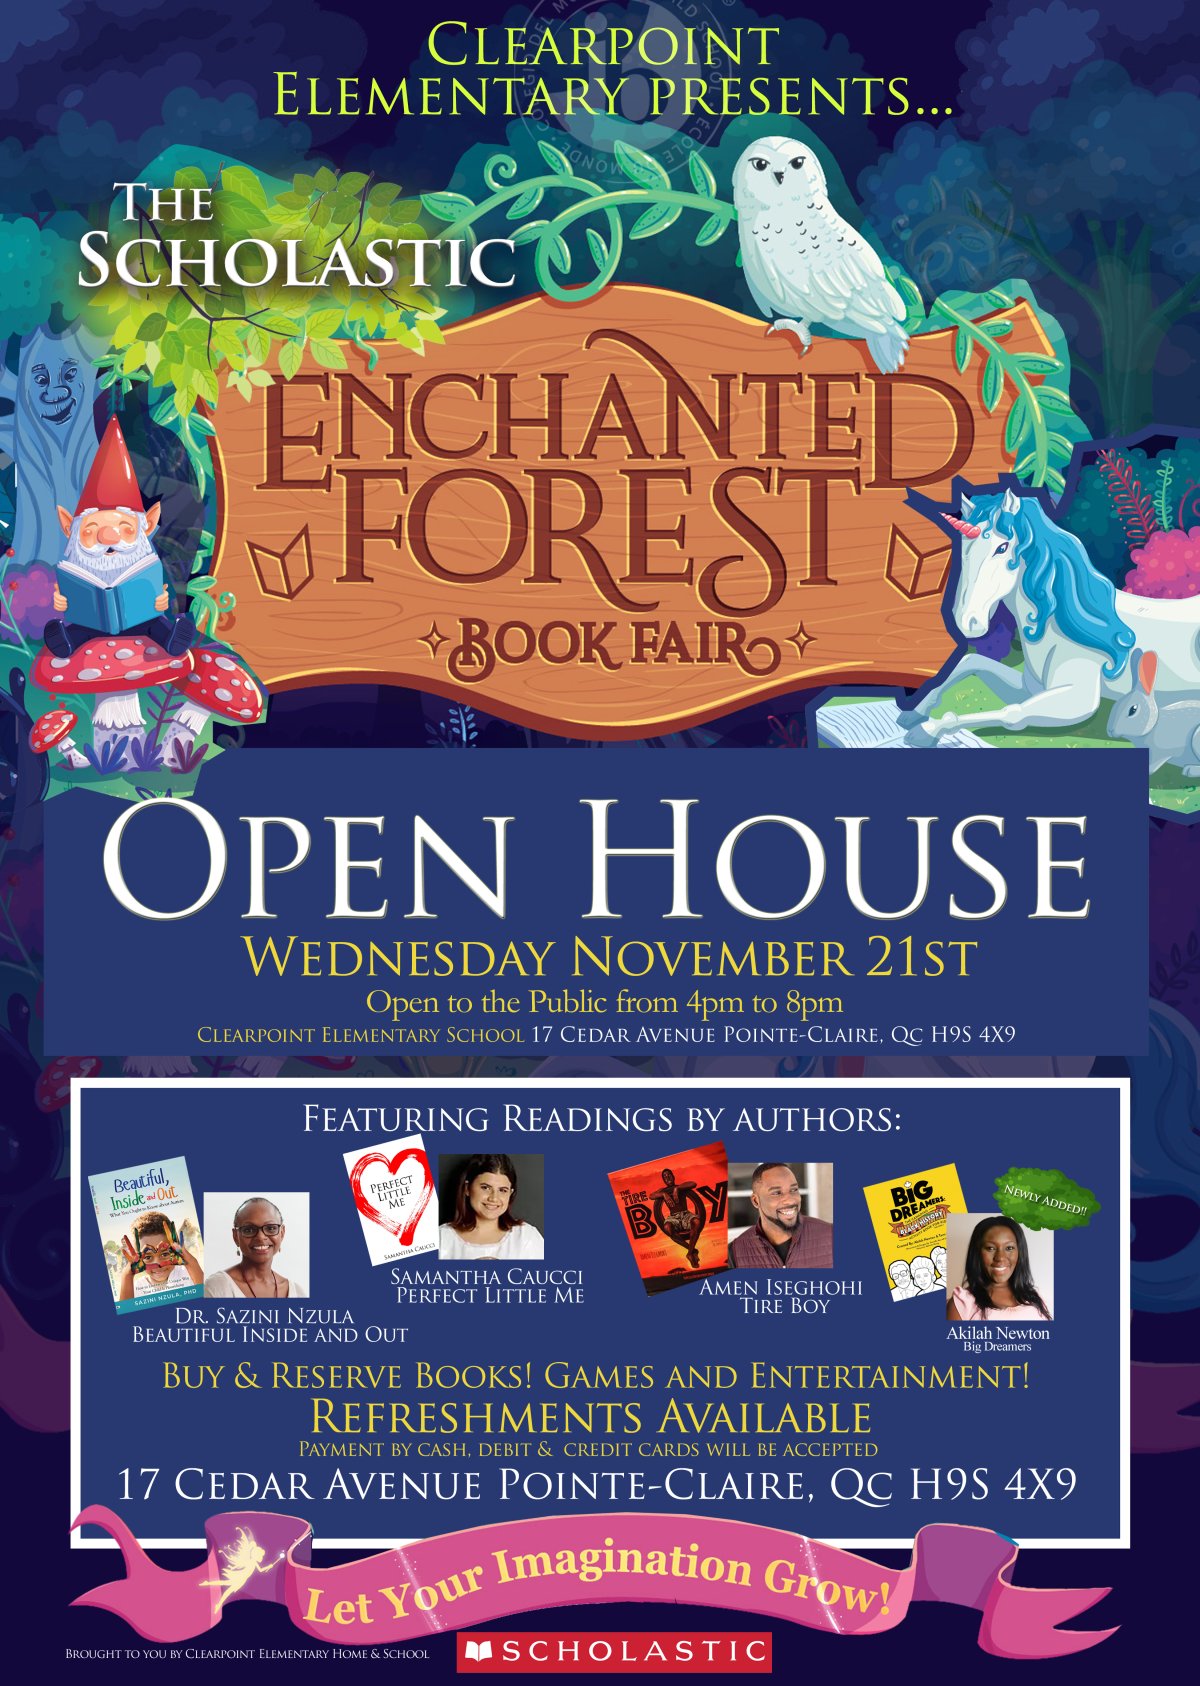 Clearpoint Elementary presents The Scholastics Enchanted Forest Book Fair - image